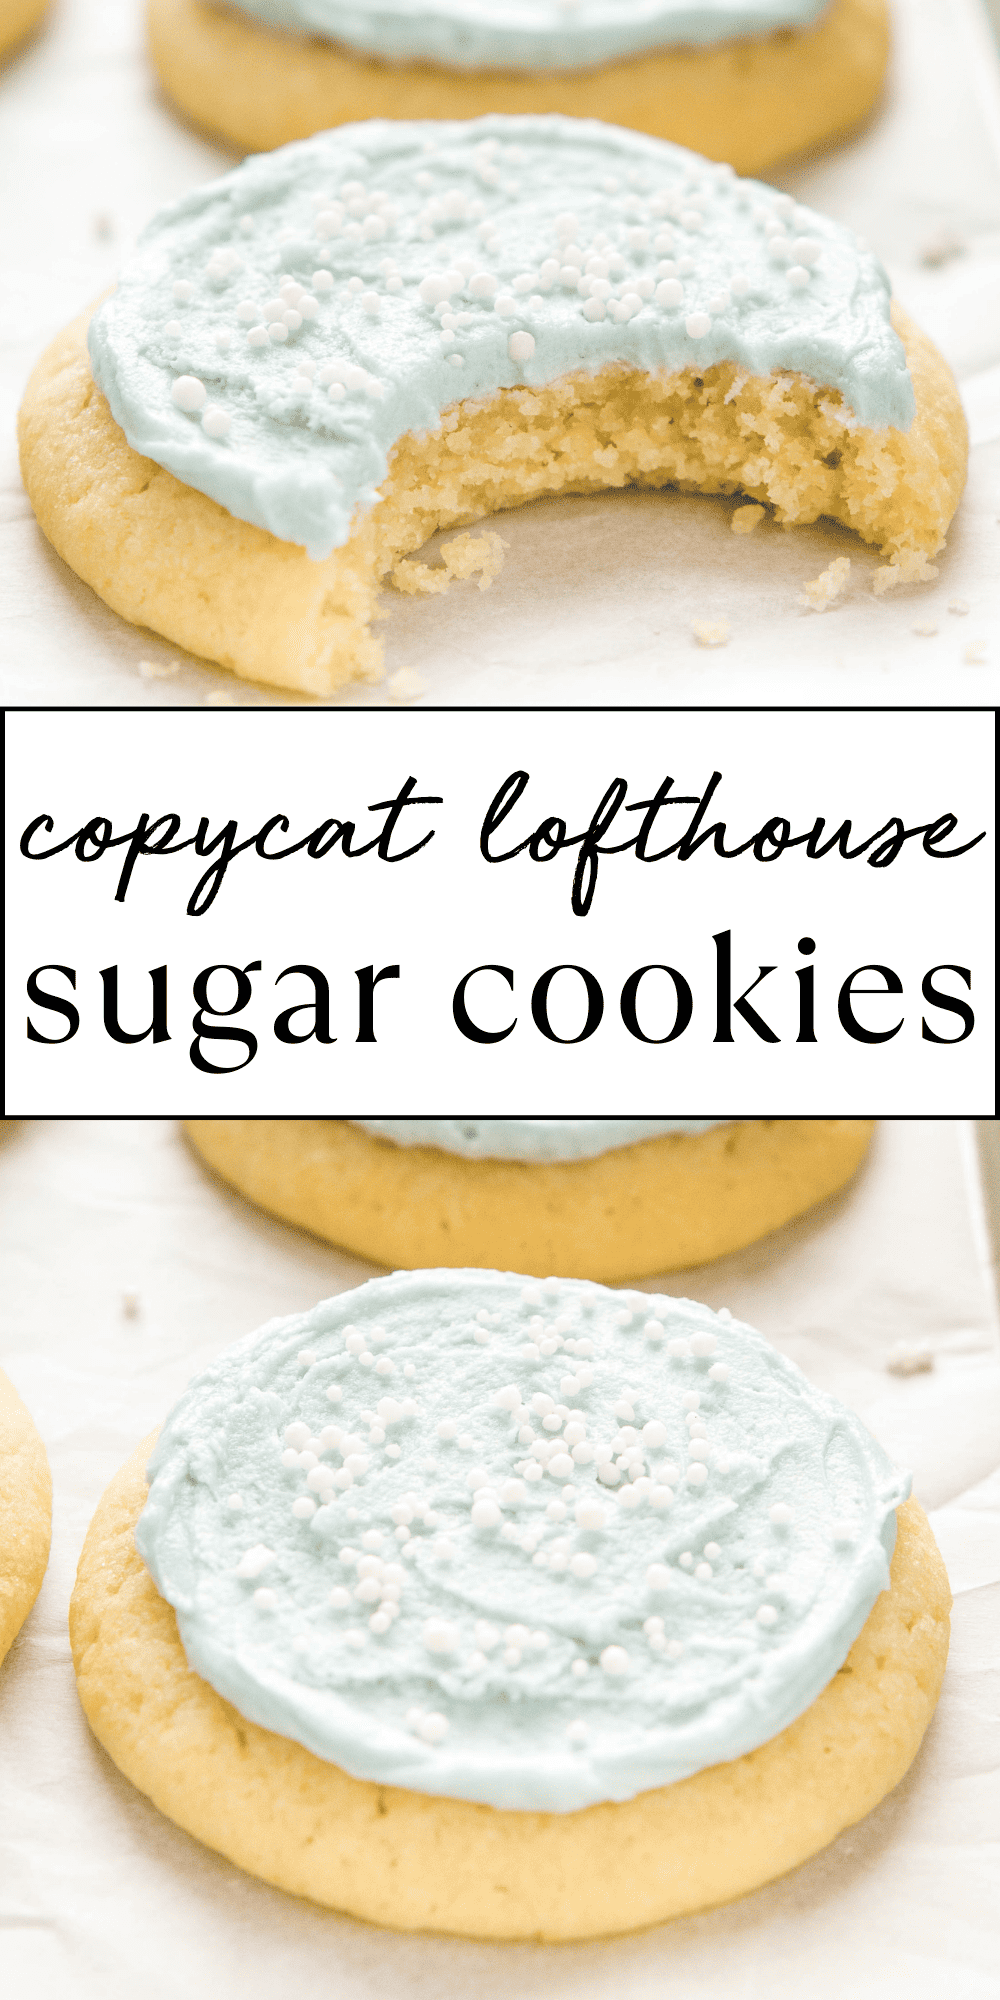 This Easy Sugar Cookies recipe makes the BEST frosted sugar cookies! No chilling the dough and no rolling - an easy sugar cookie recipe that makes most soft and chewy sugar cookies that taste just like Lofthouse cookies! Recipe from thebusybaker.ca! #cookies #christmas #sugarcookies #frostedcookies #holiday #thanksgiving #christmascookies #sprinkles #christmascraft #easyrecipe #easychristmasrecipe via @busybakerblog